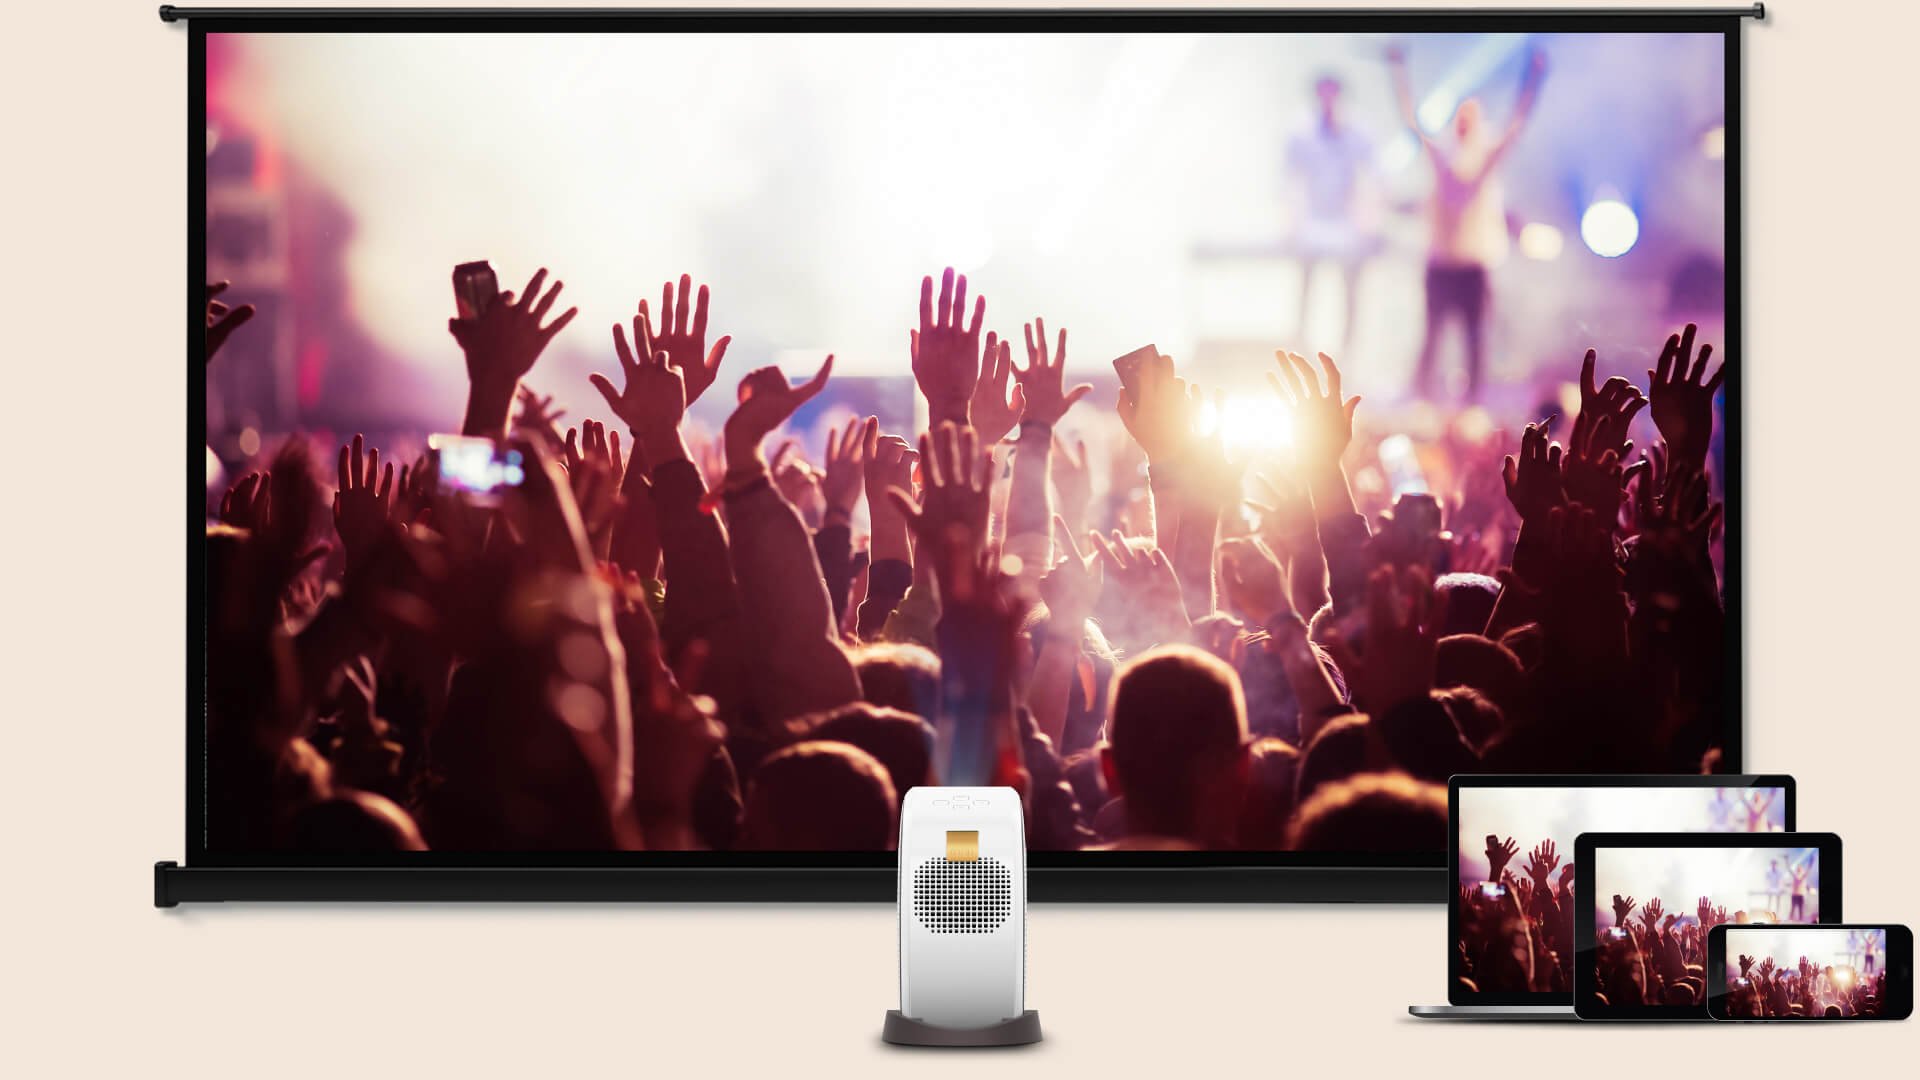 The BenQ GV31 portable projector fully supports Apple AirPlay and Google Chromecast.